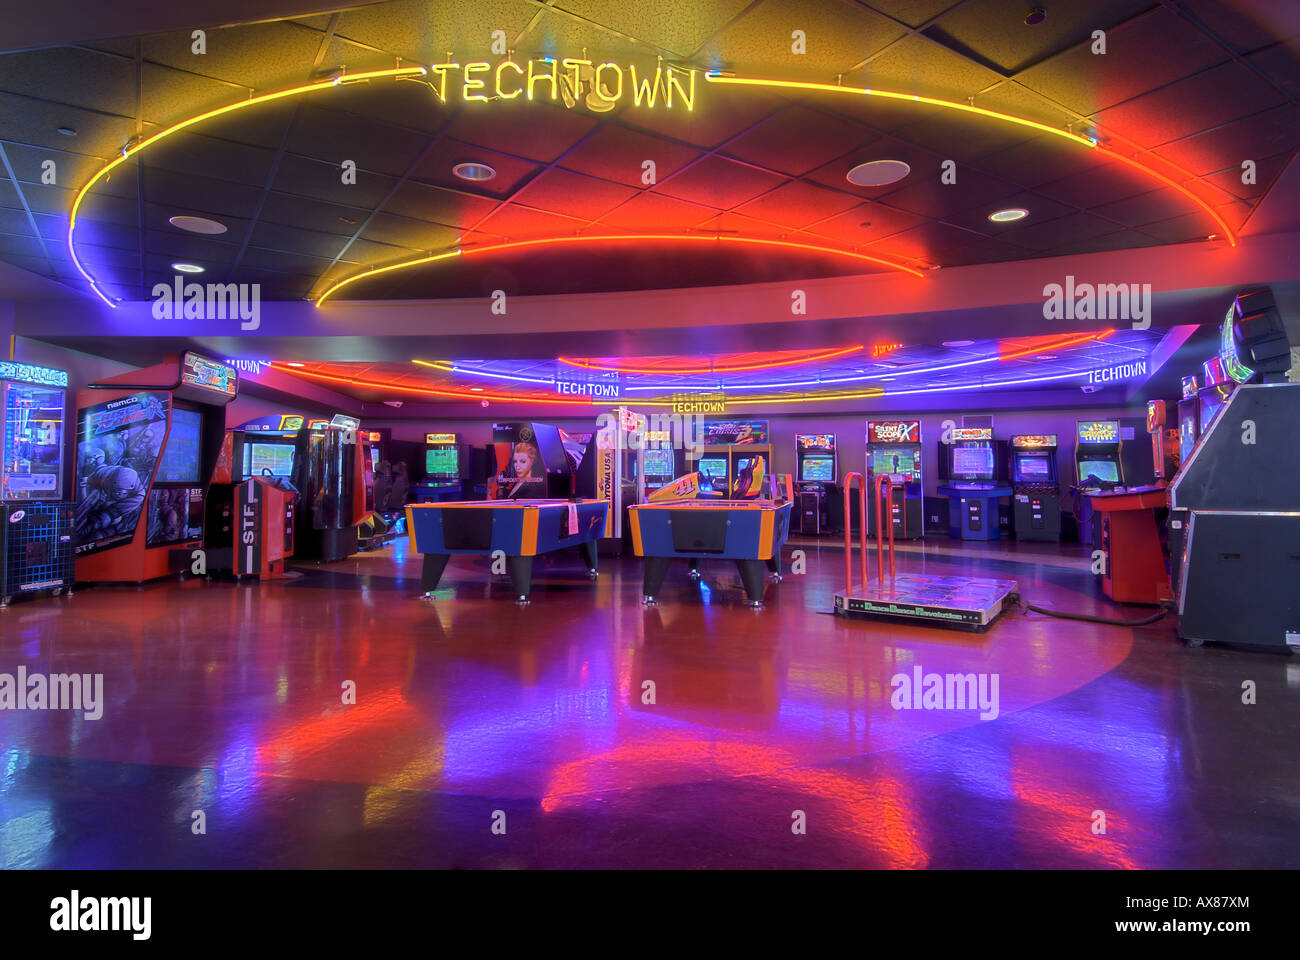 A vibrant and colourful high tech gaming arcade Stock Photo